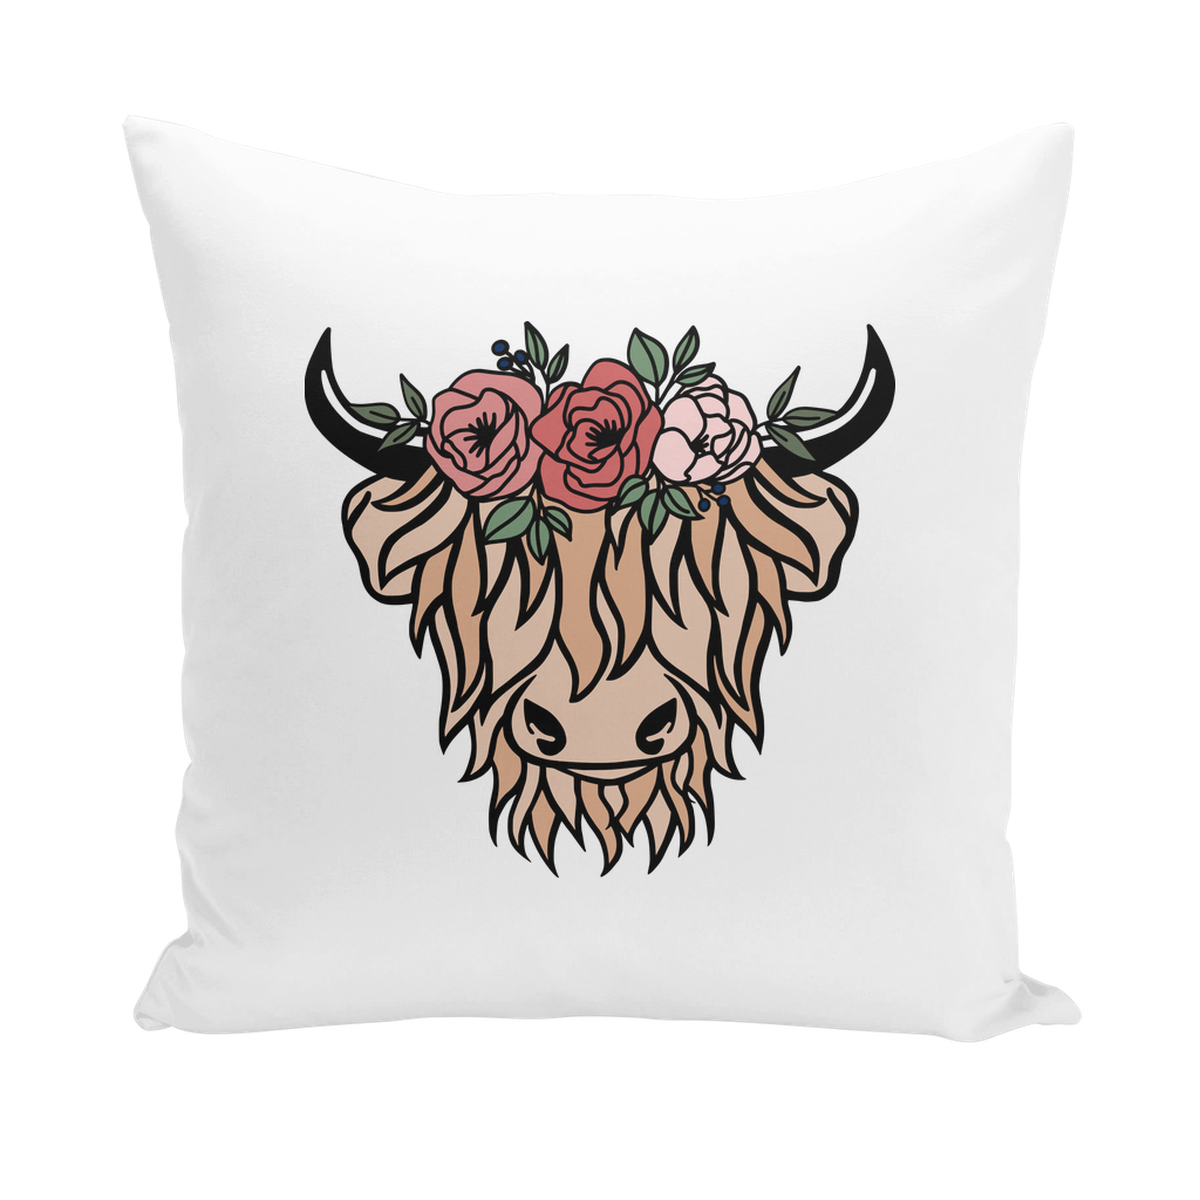 Highland Cow in a Flower Crown Throw cushion covers